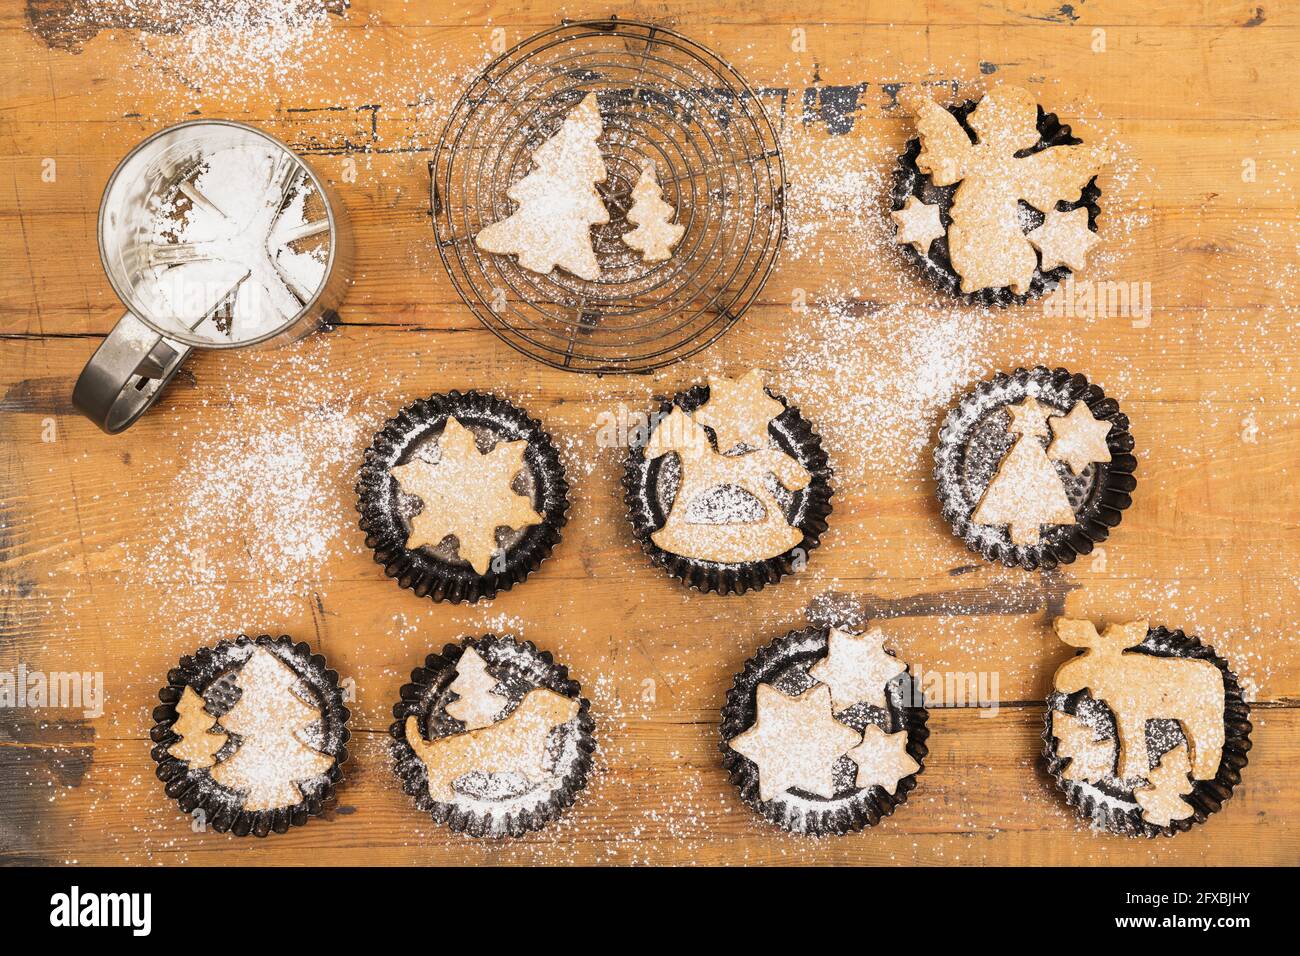 Powdered sugar shaker and fresh homemade Christmas cookies lying on wooden surface Stock Photo